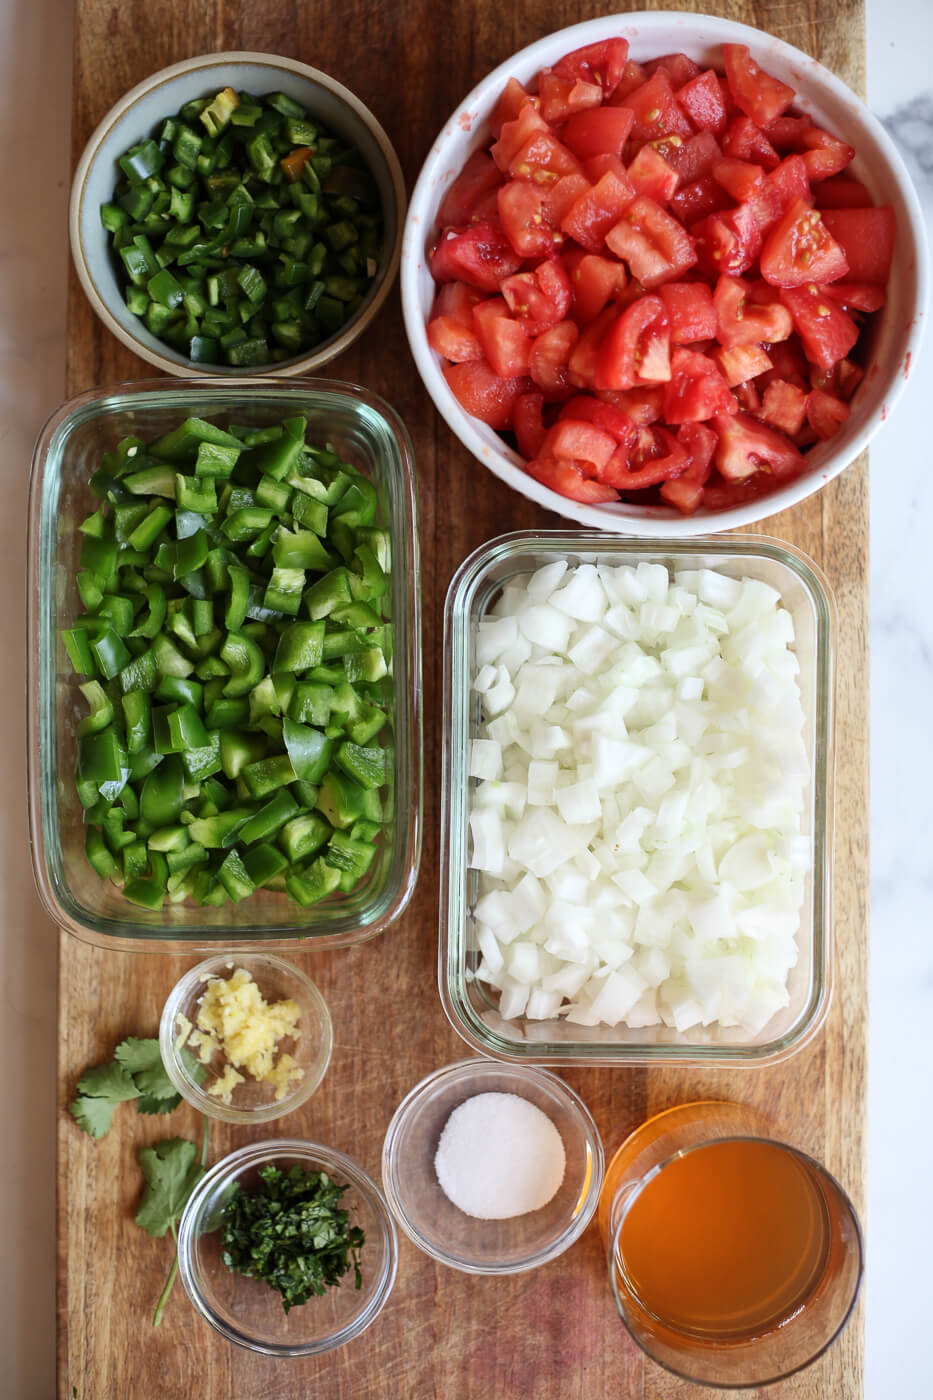 The ingredients for homemade canned salsa are prepared on a cutting board and include tomatoes, bell pepper, onion, jalapeno, garlic, cilantro, salt, and apple cider vinegar. 